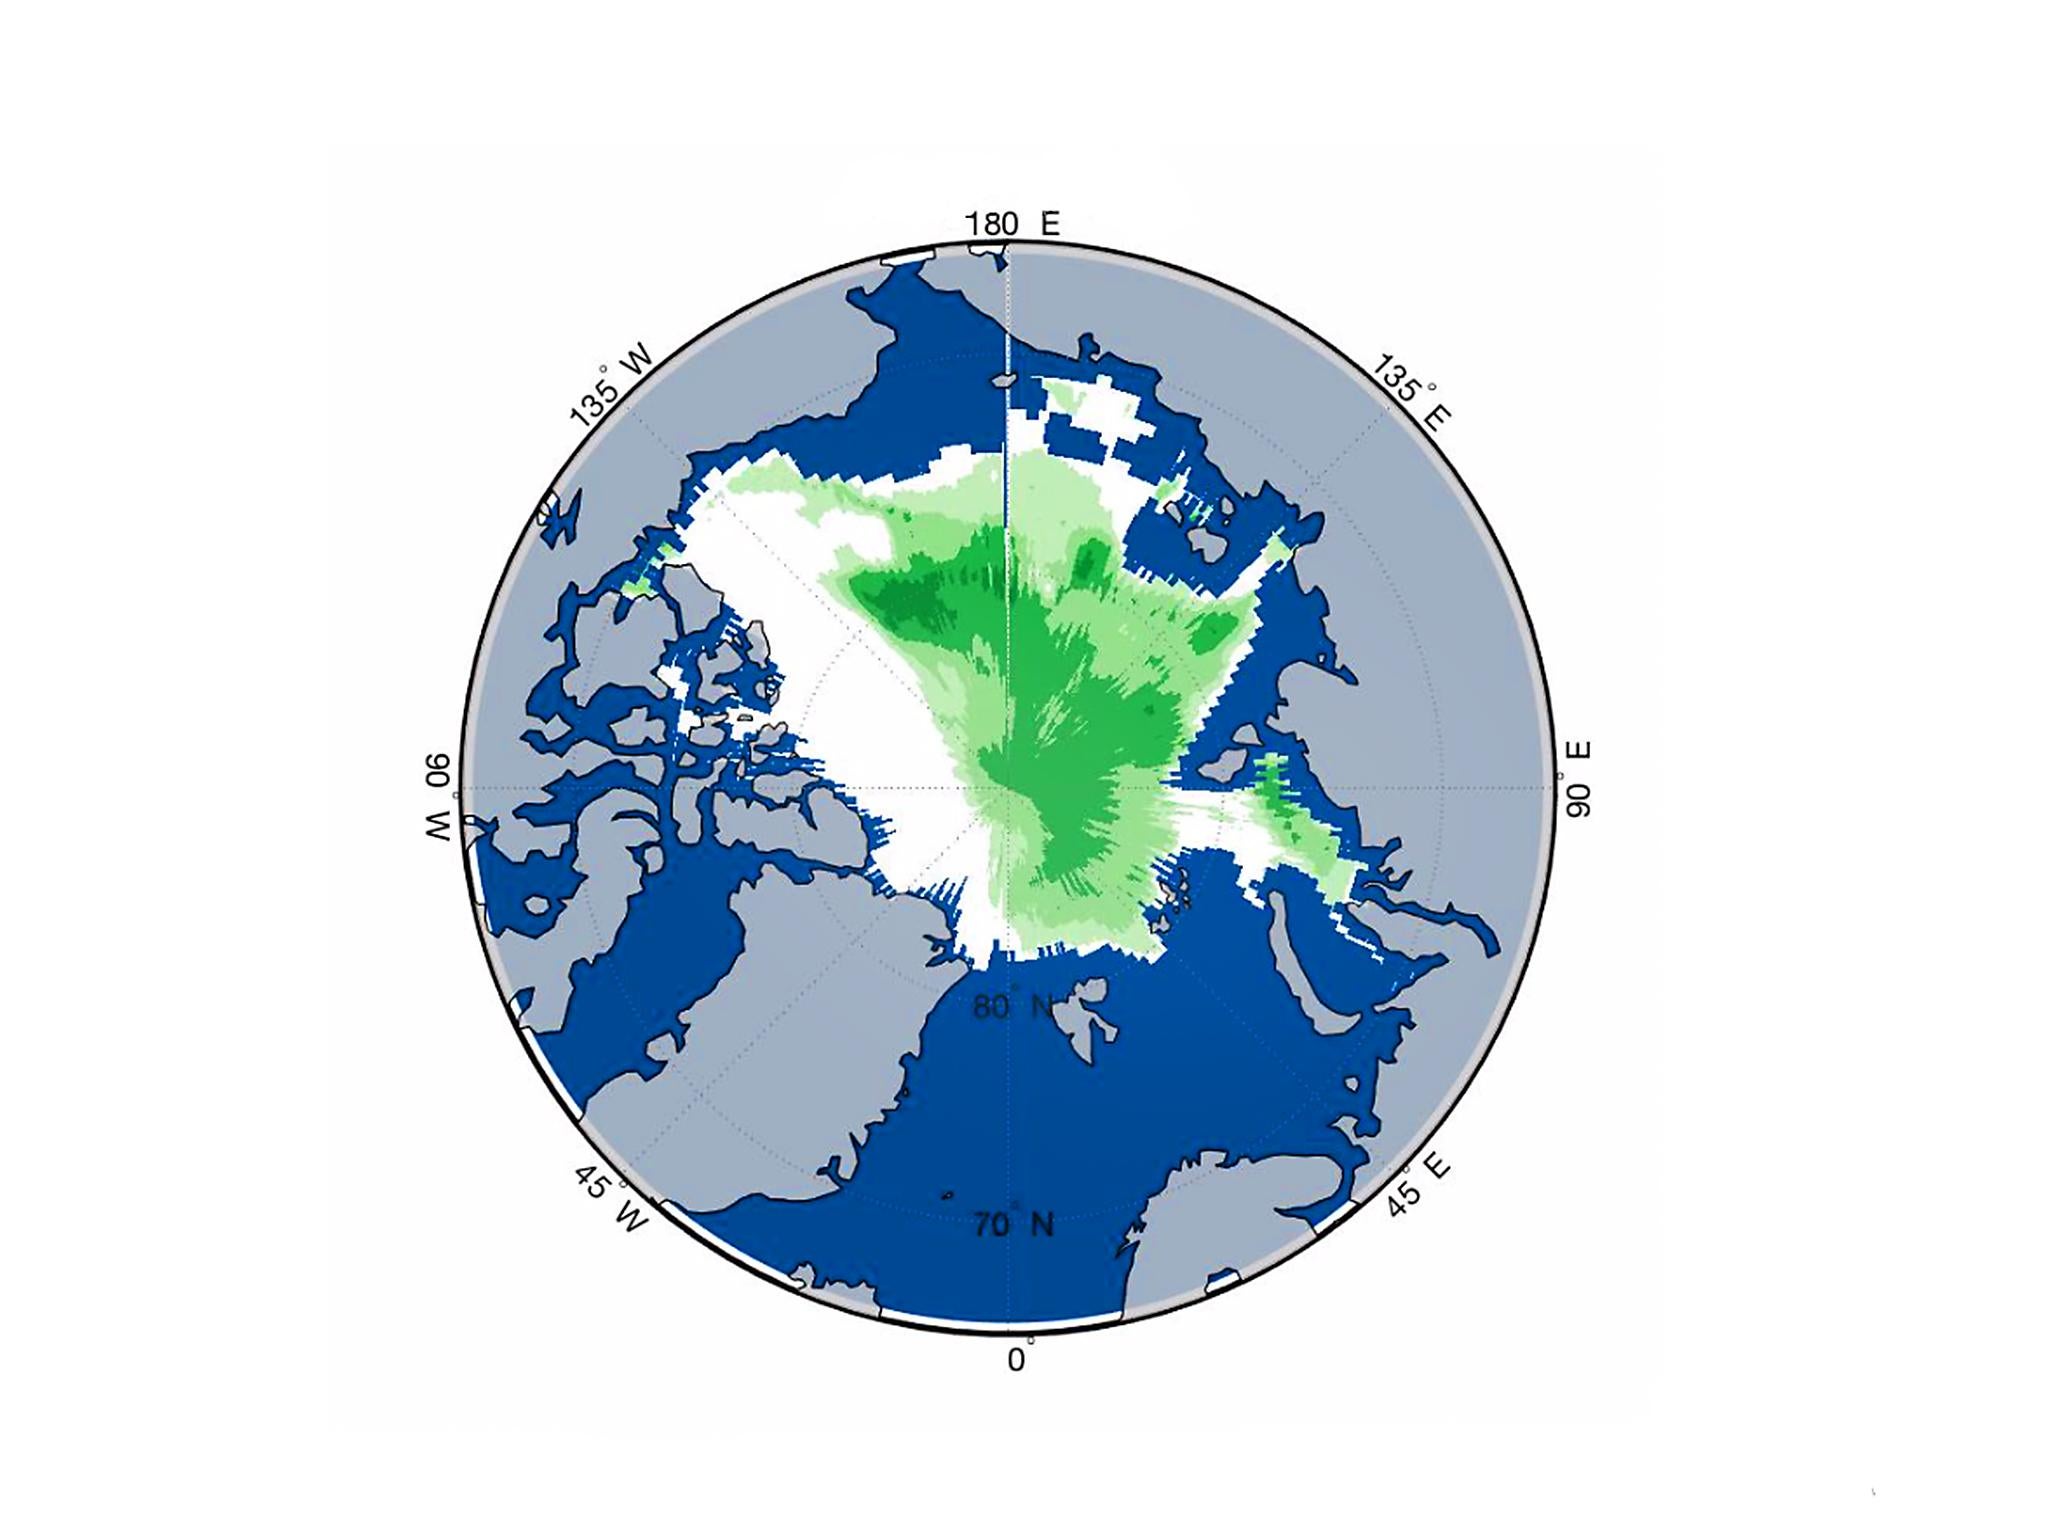 This computer model shows areas of ice thin enough to allow plankton to grow underneath